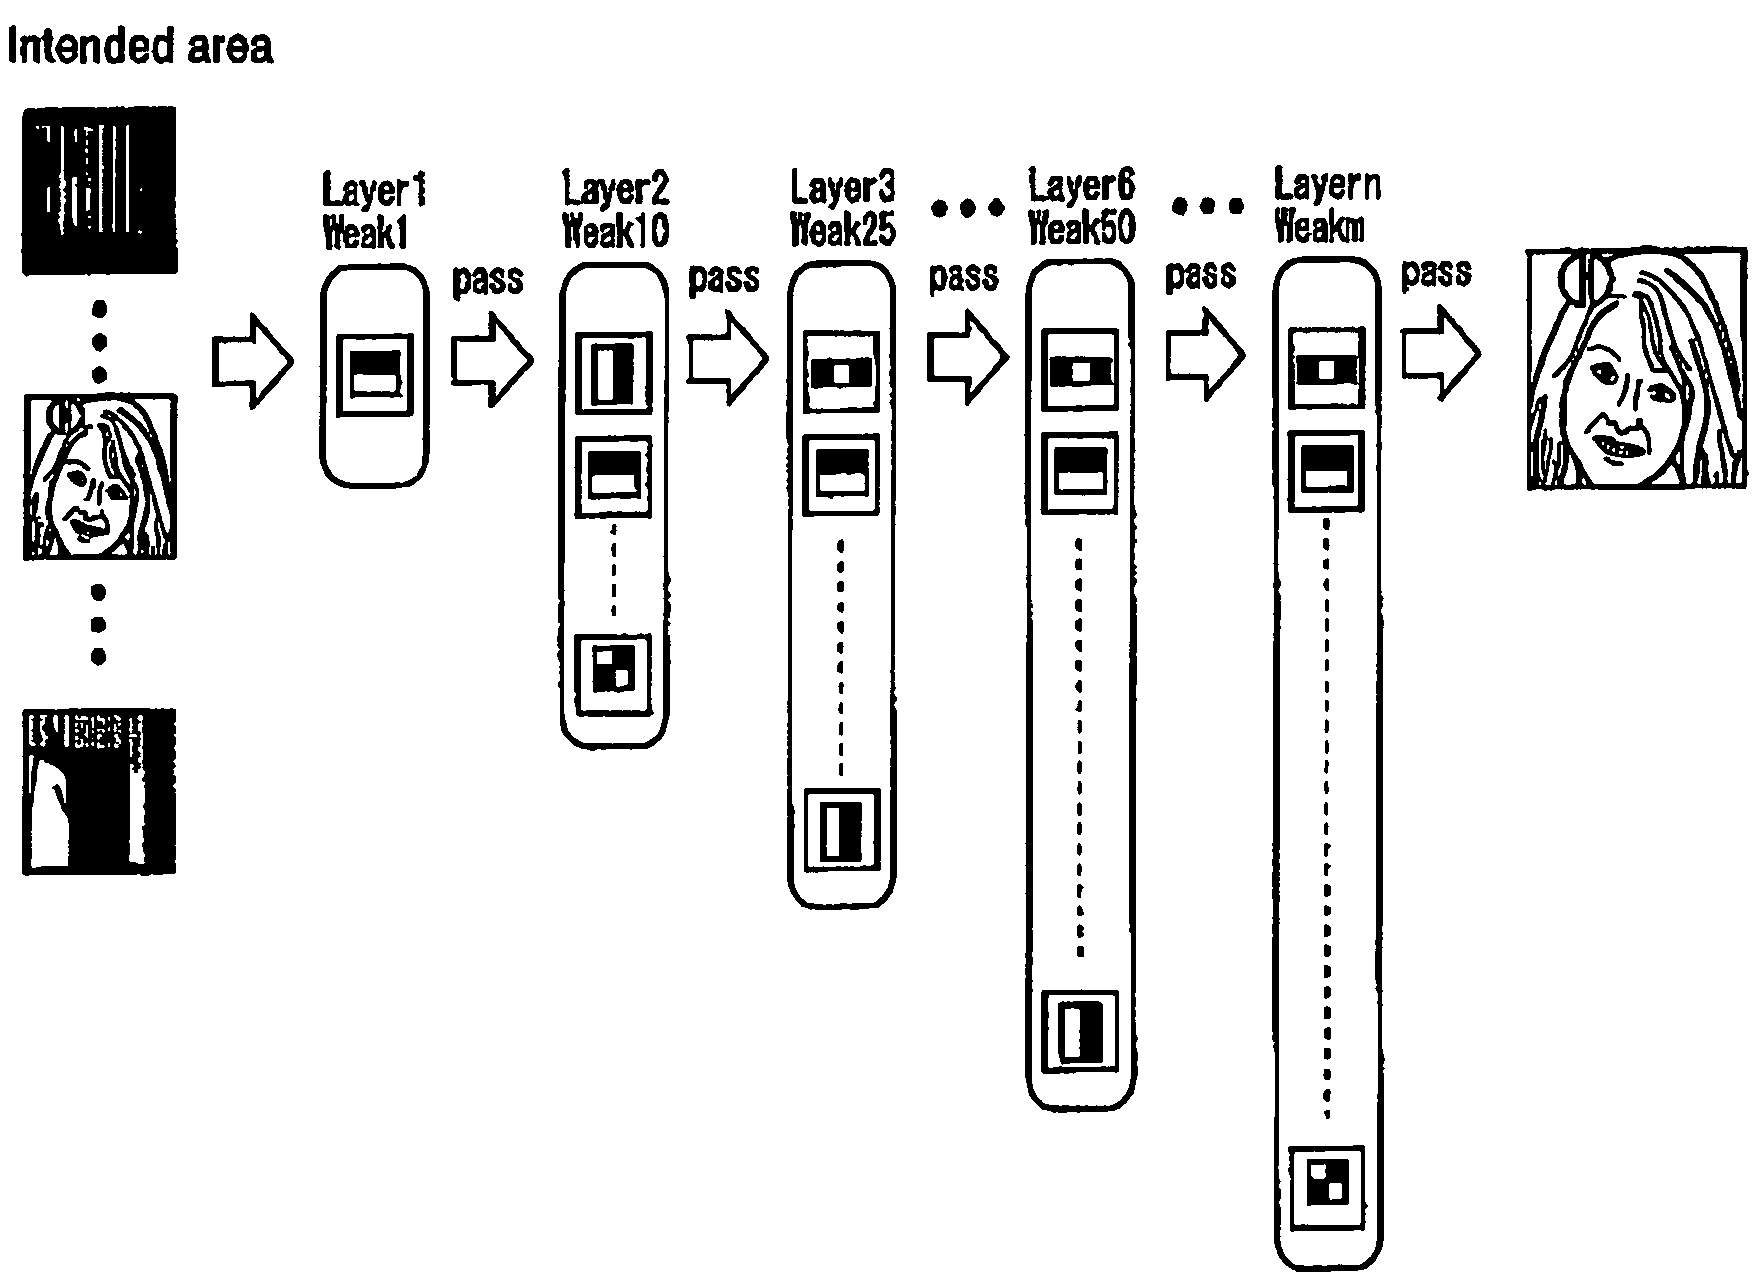 Specified object detection apparatus